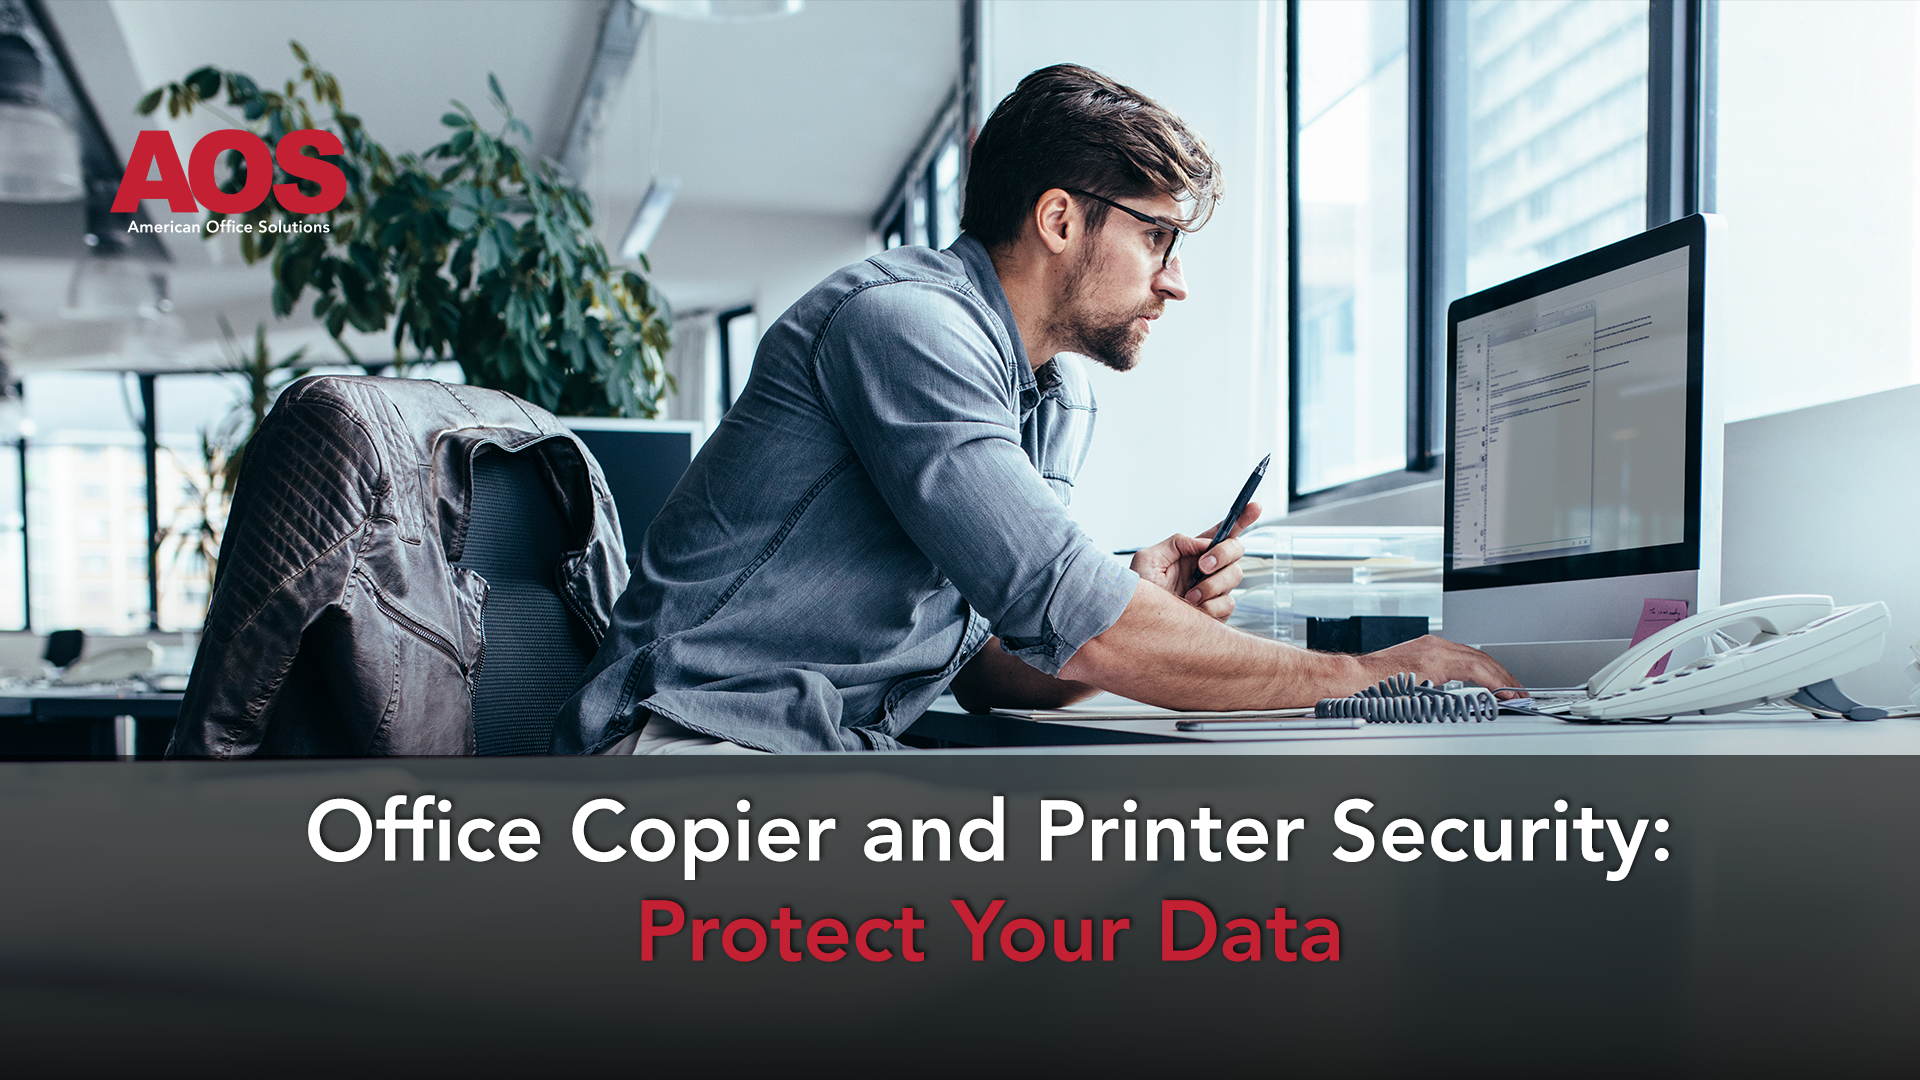 Office Copier and Printer Security: Protect Your Data